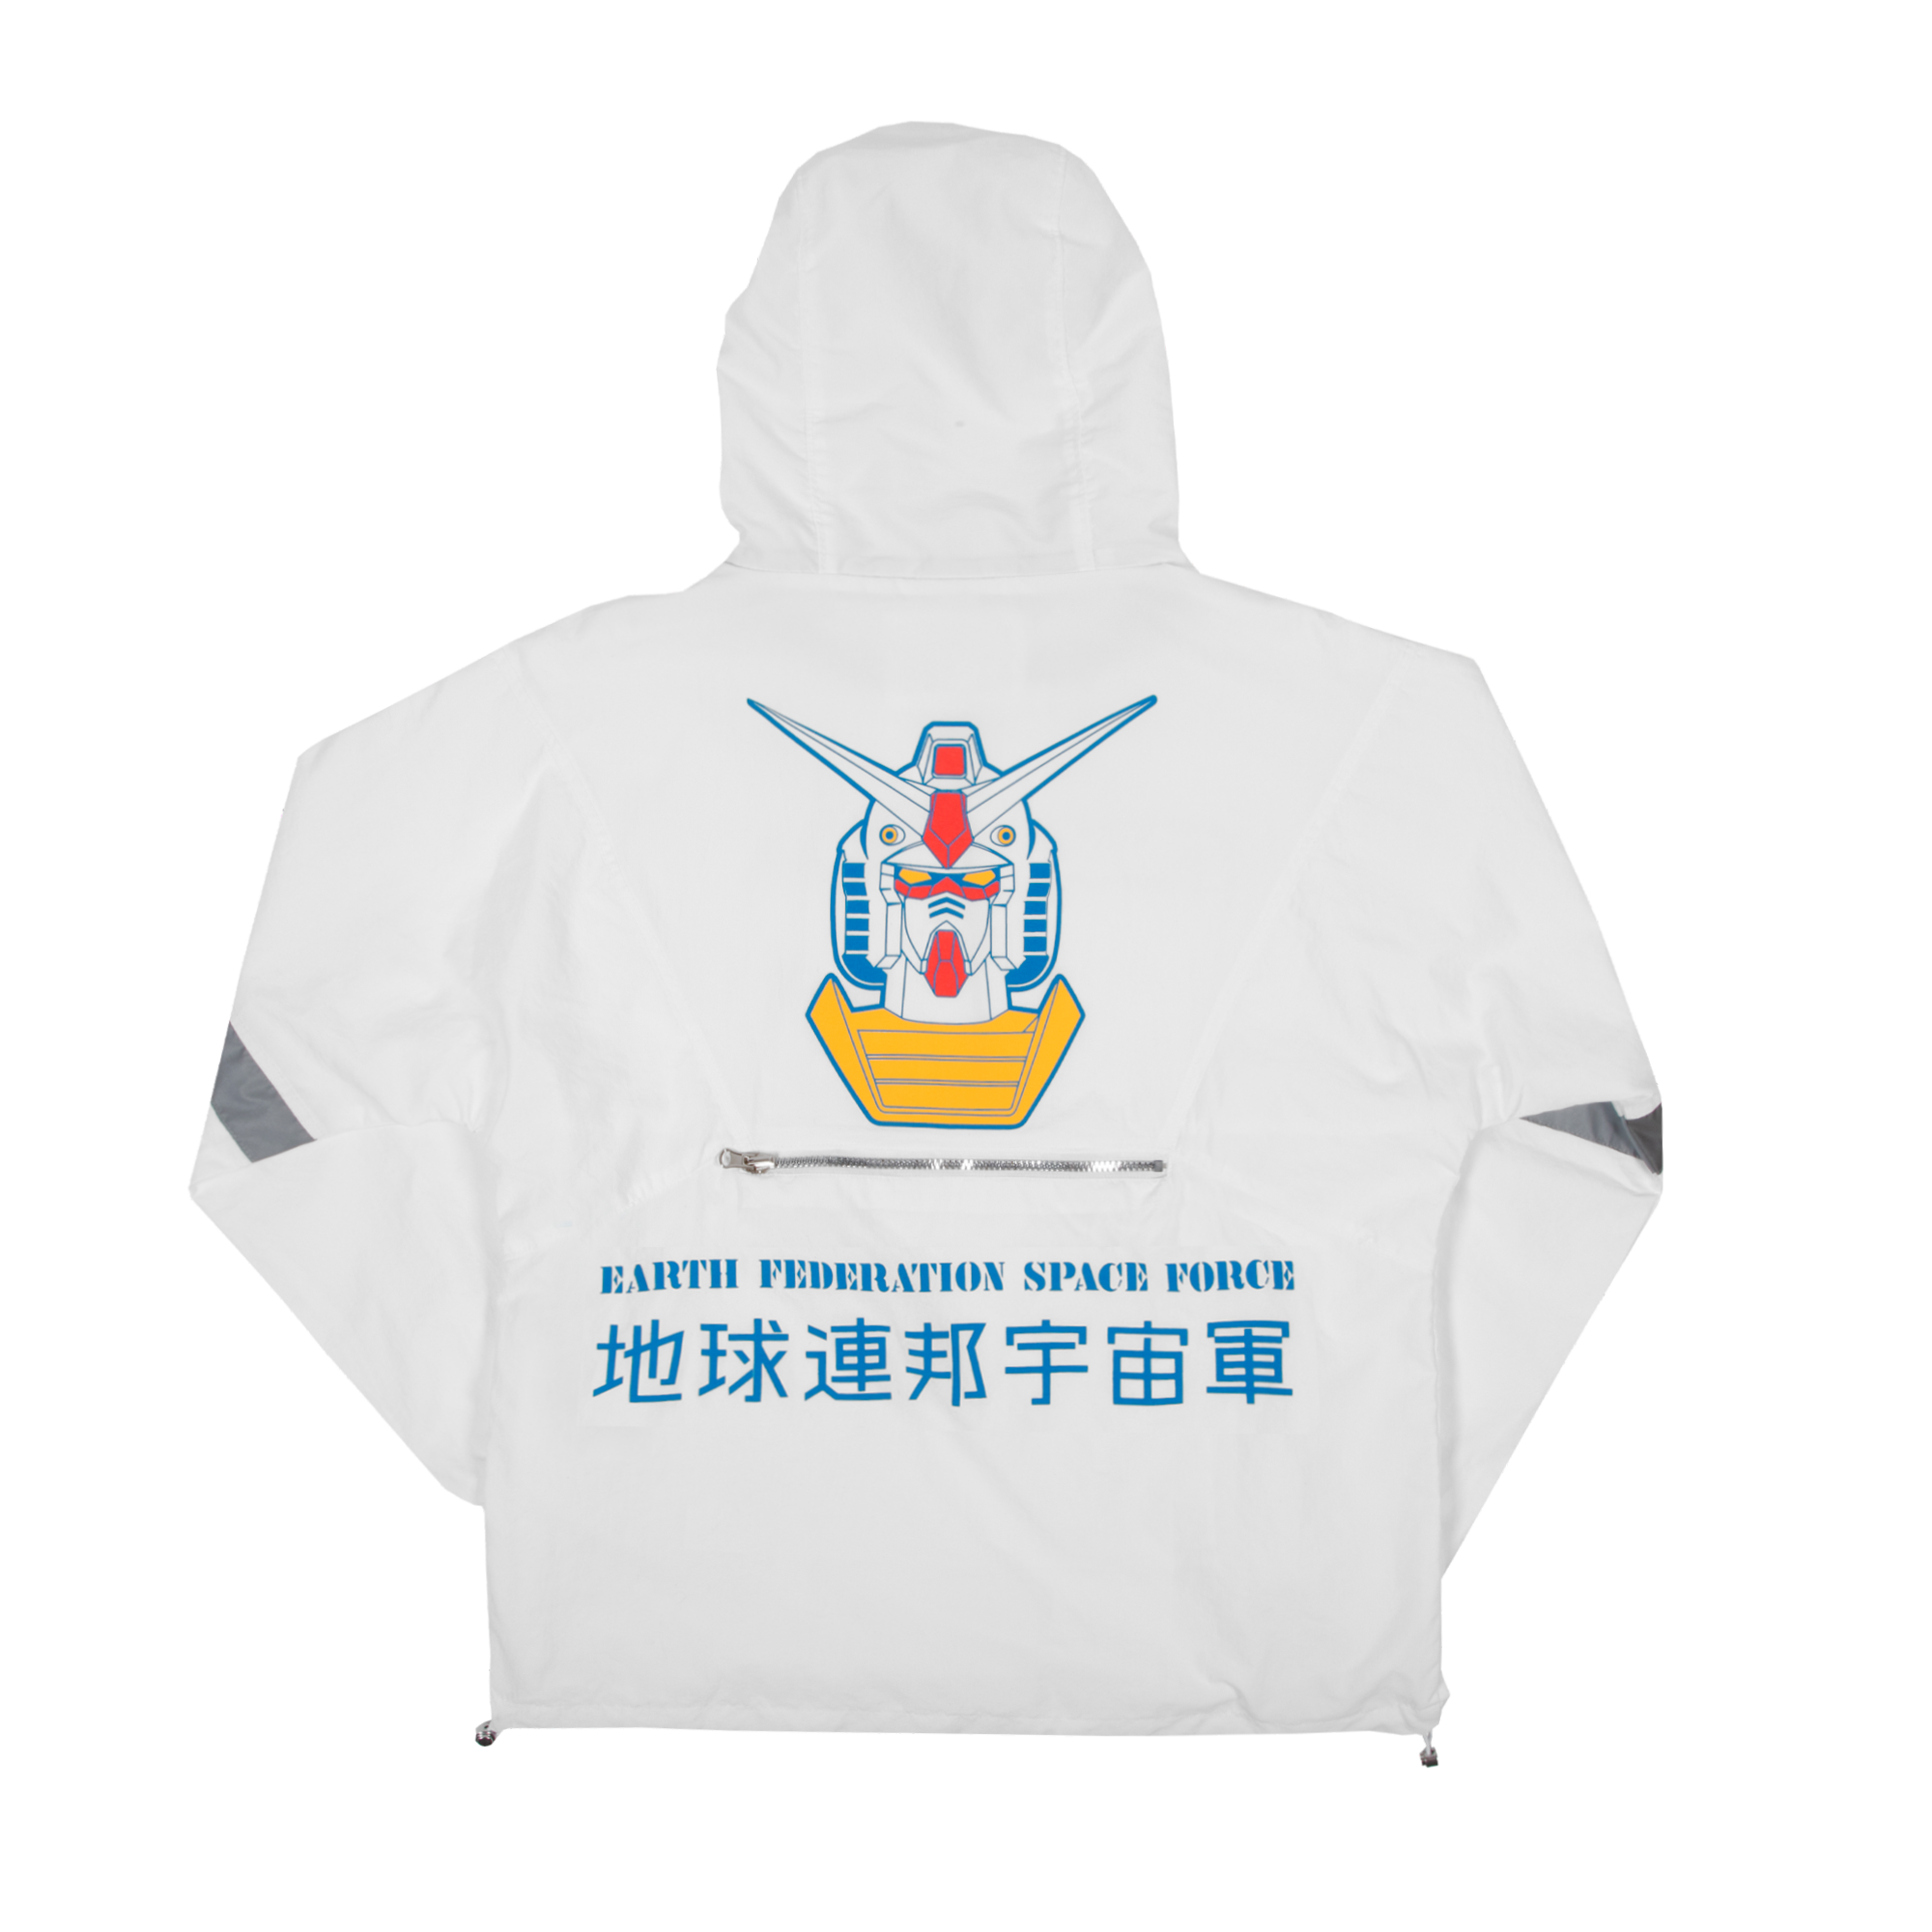 Earth Federation Space Force White Anorak